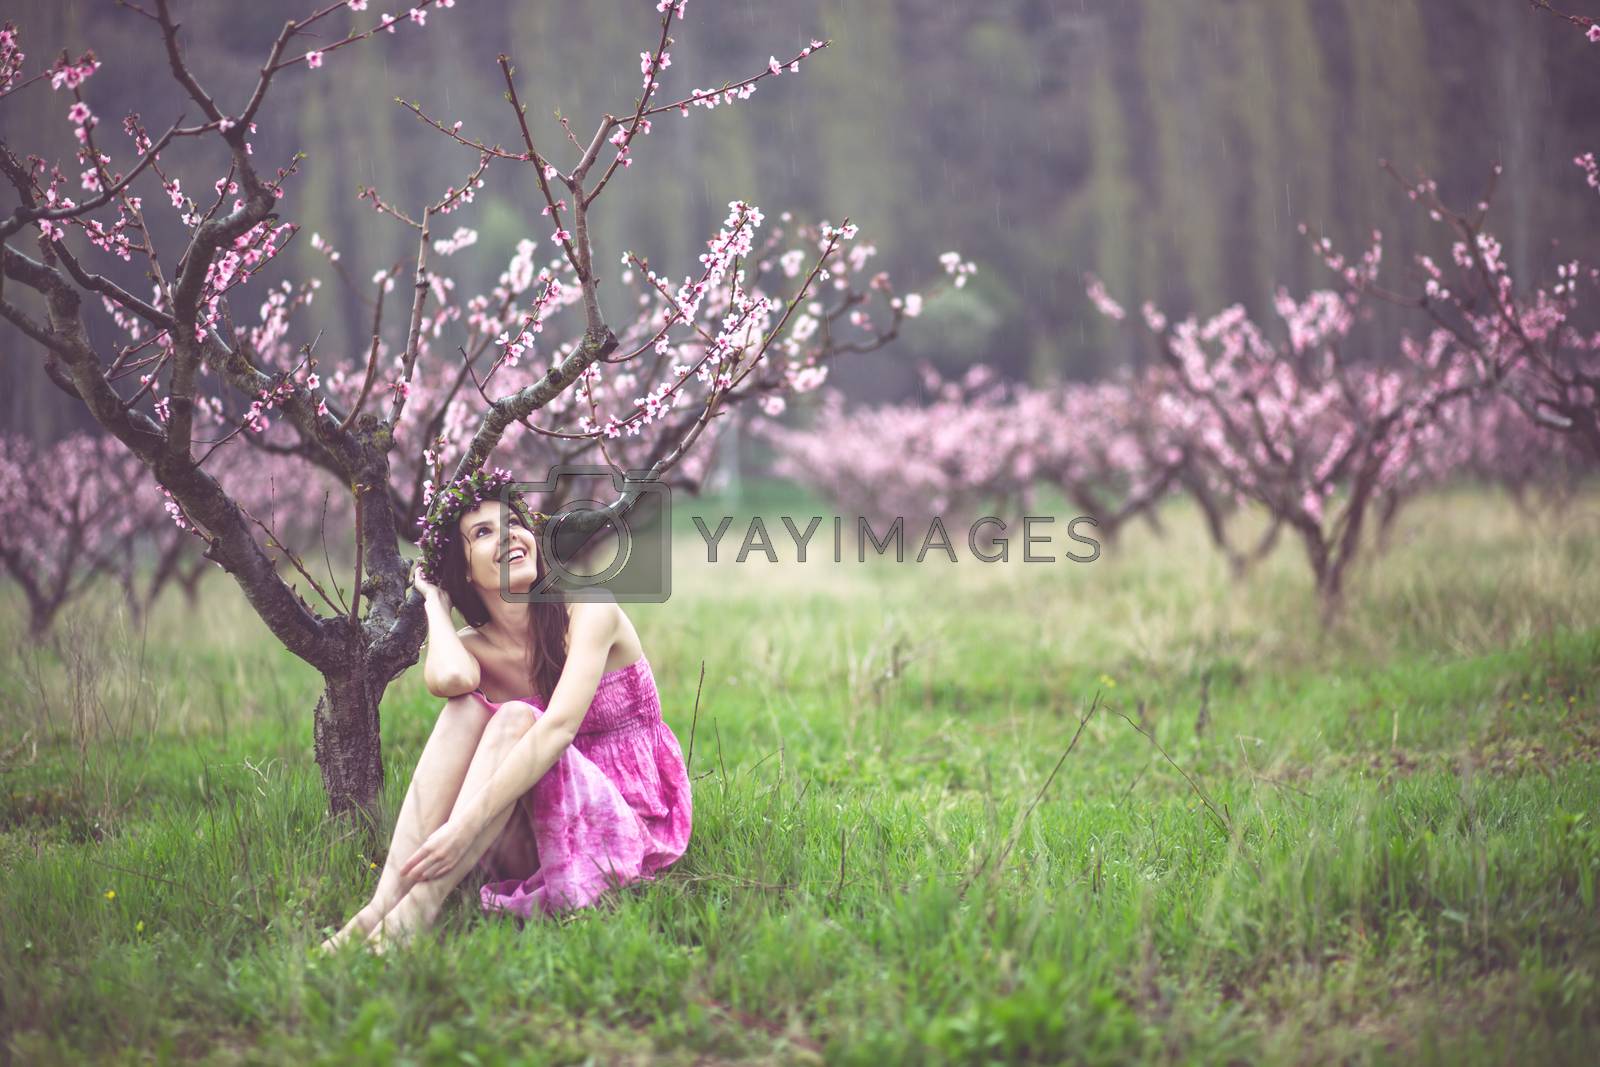 Royalty free image of Woman in spring garden by alenkasm